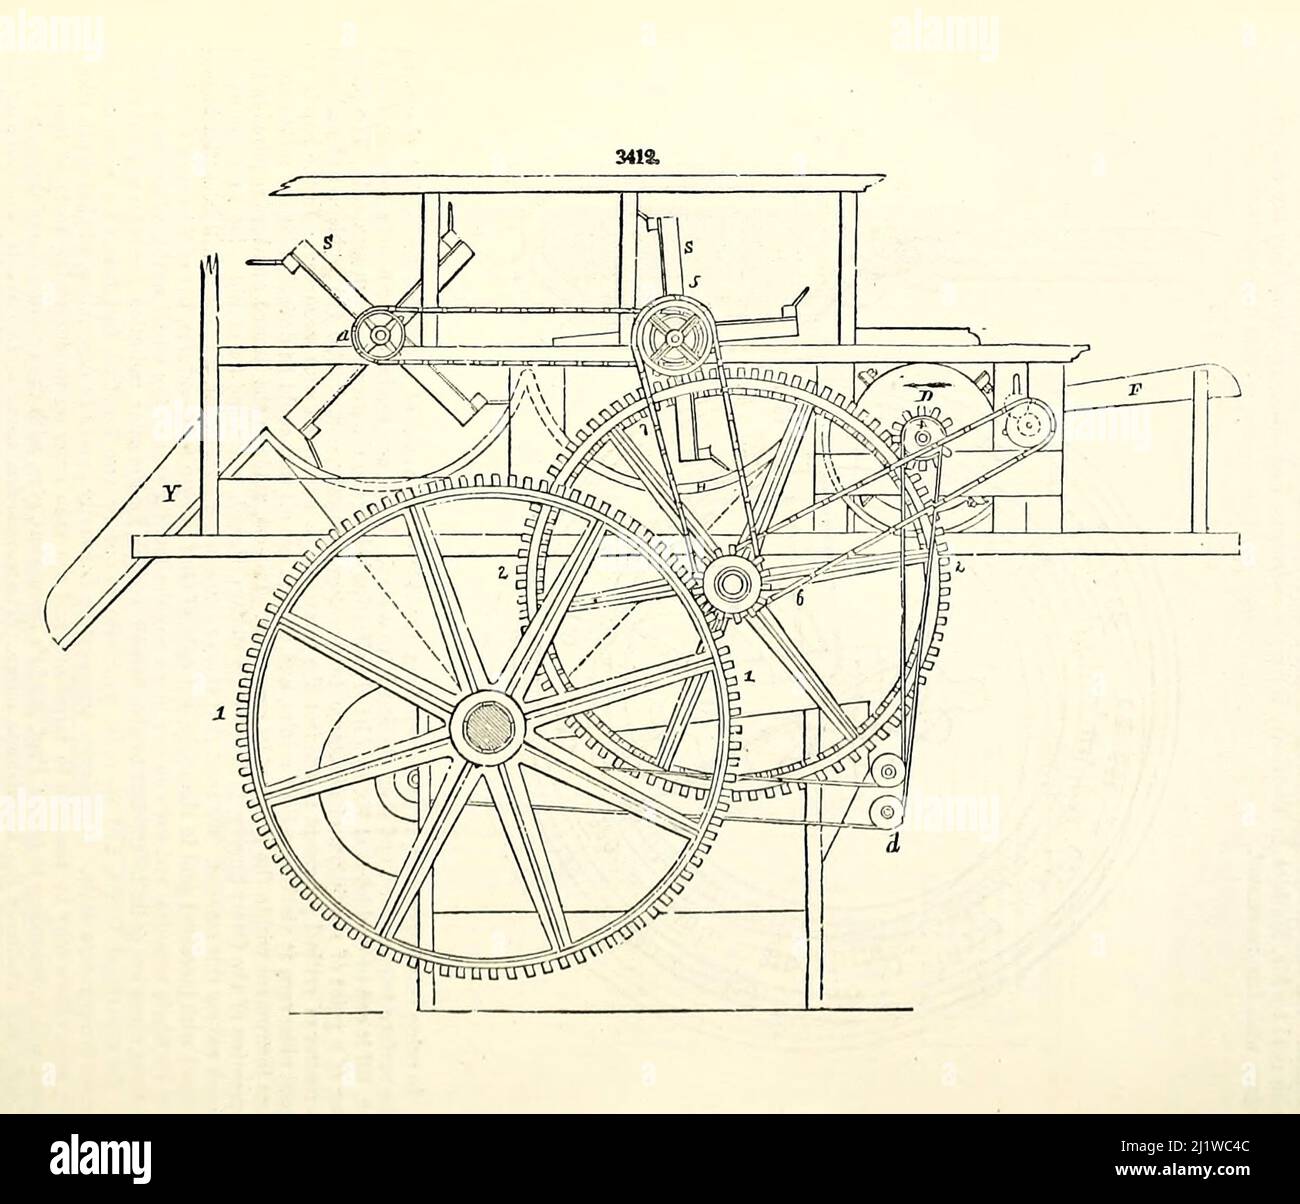 Threshing Machine from Appleton's dictionary of machines, mechanics, engine-work, and engineering : illustrated with four thousand engravings on wood ; in two volumes by D. Appleton and Company Published New York : D. Appleton and Co 1873 Stock Photo